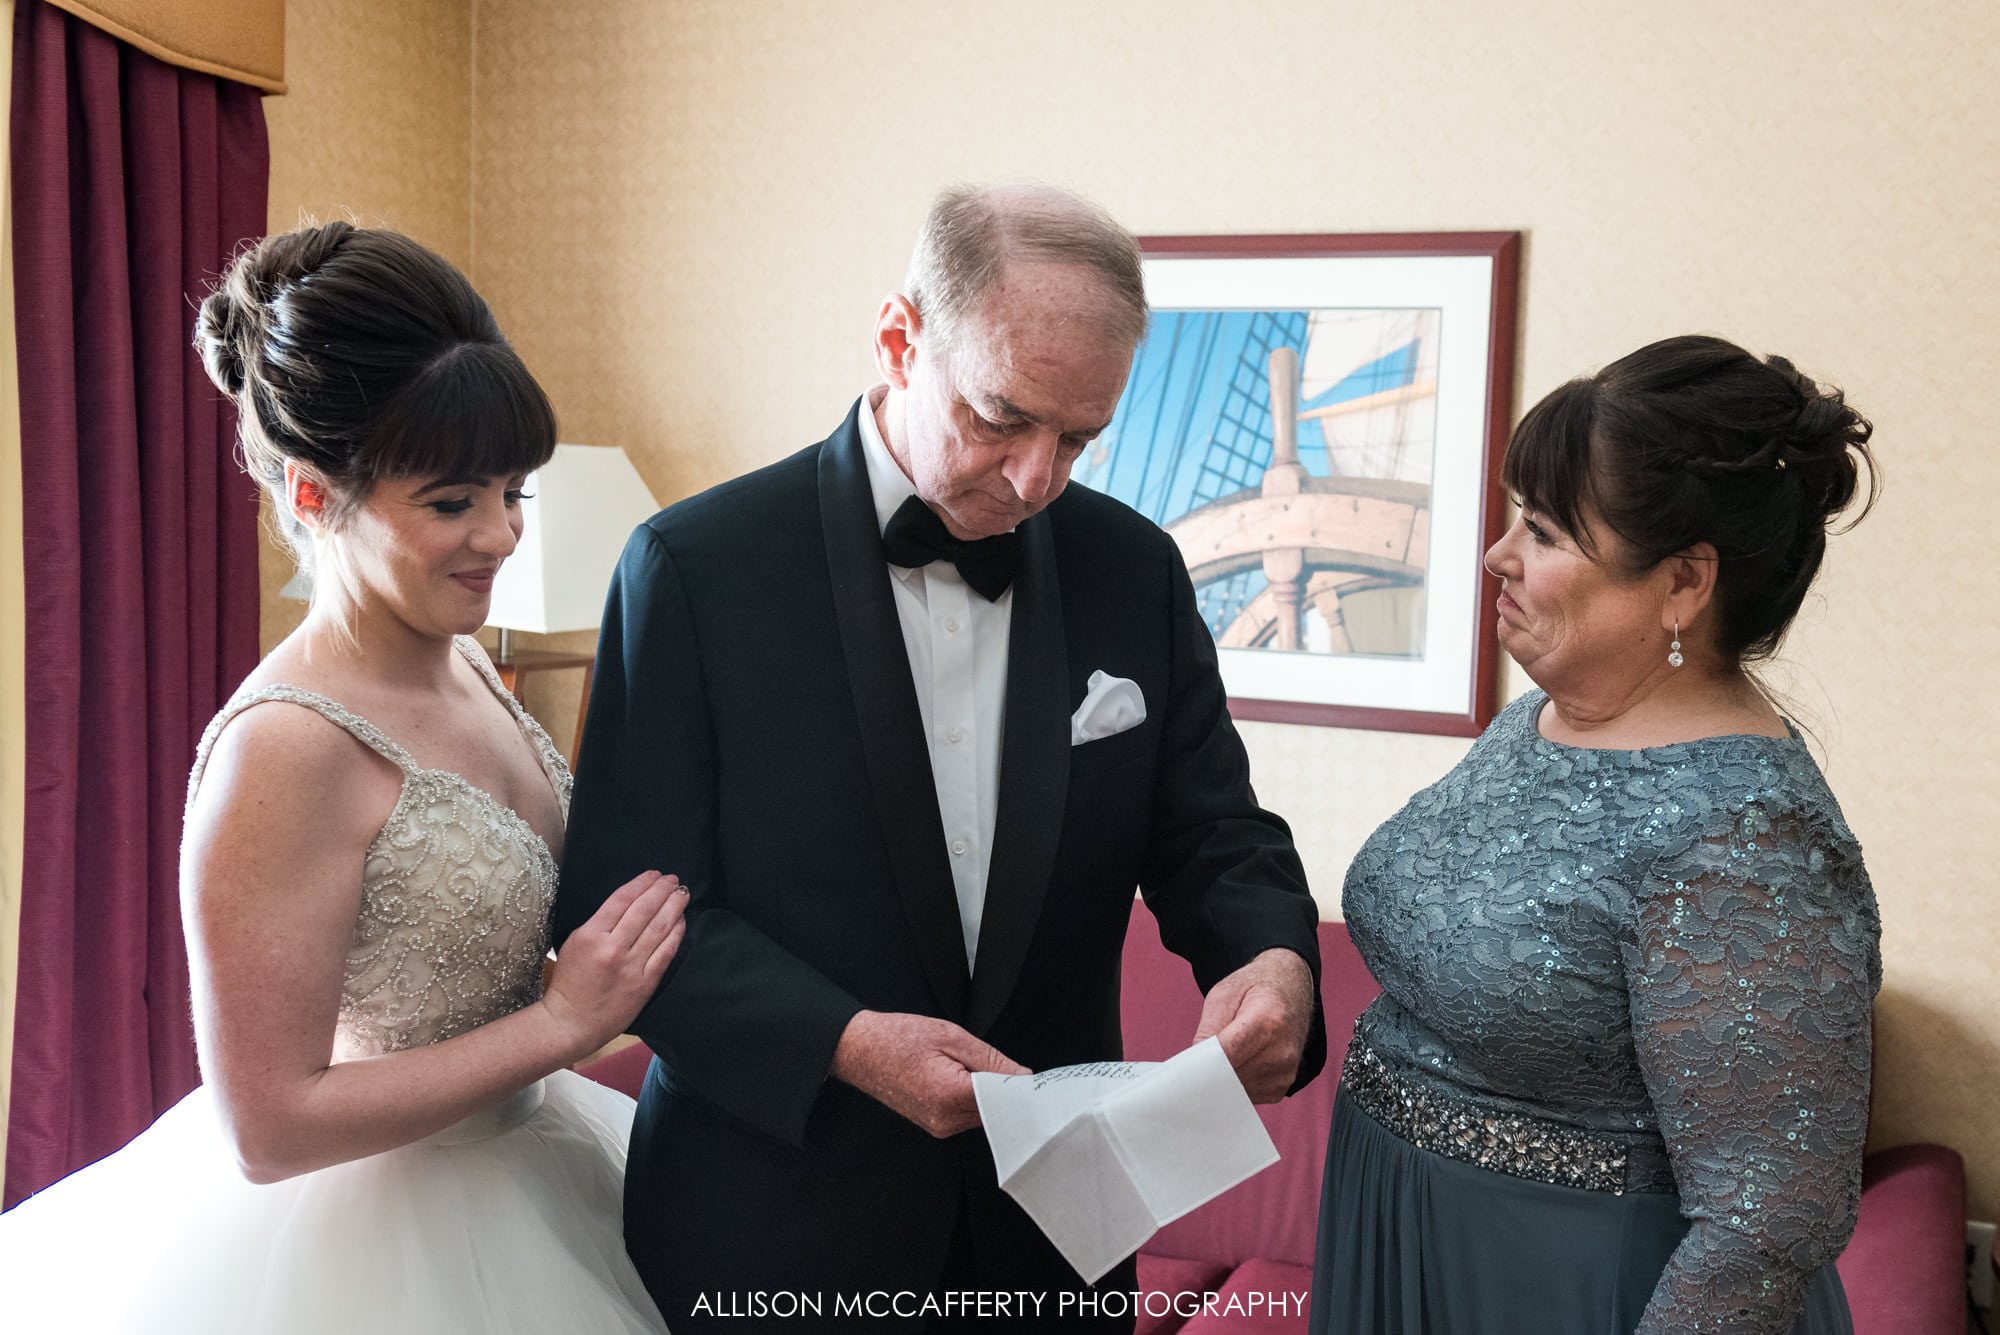 Bride giving her parents a gift before the wedding